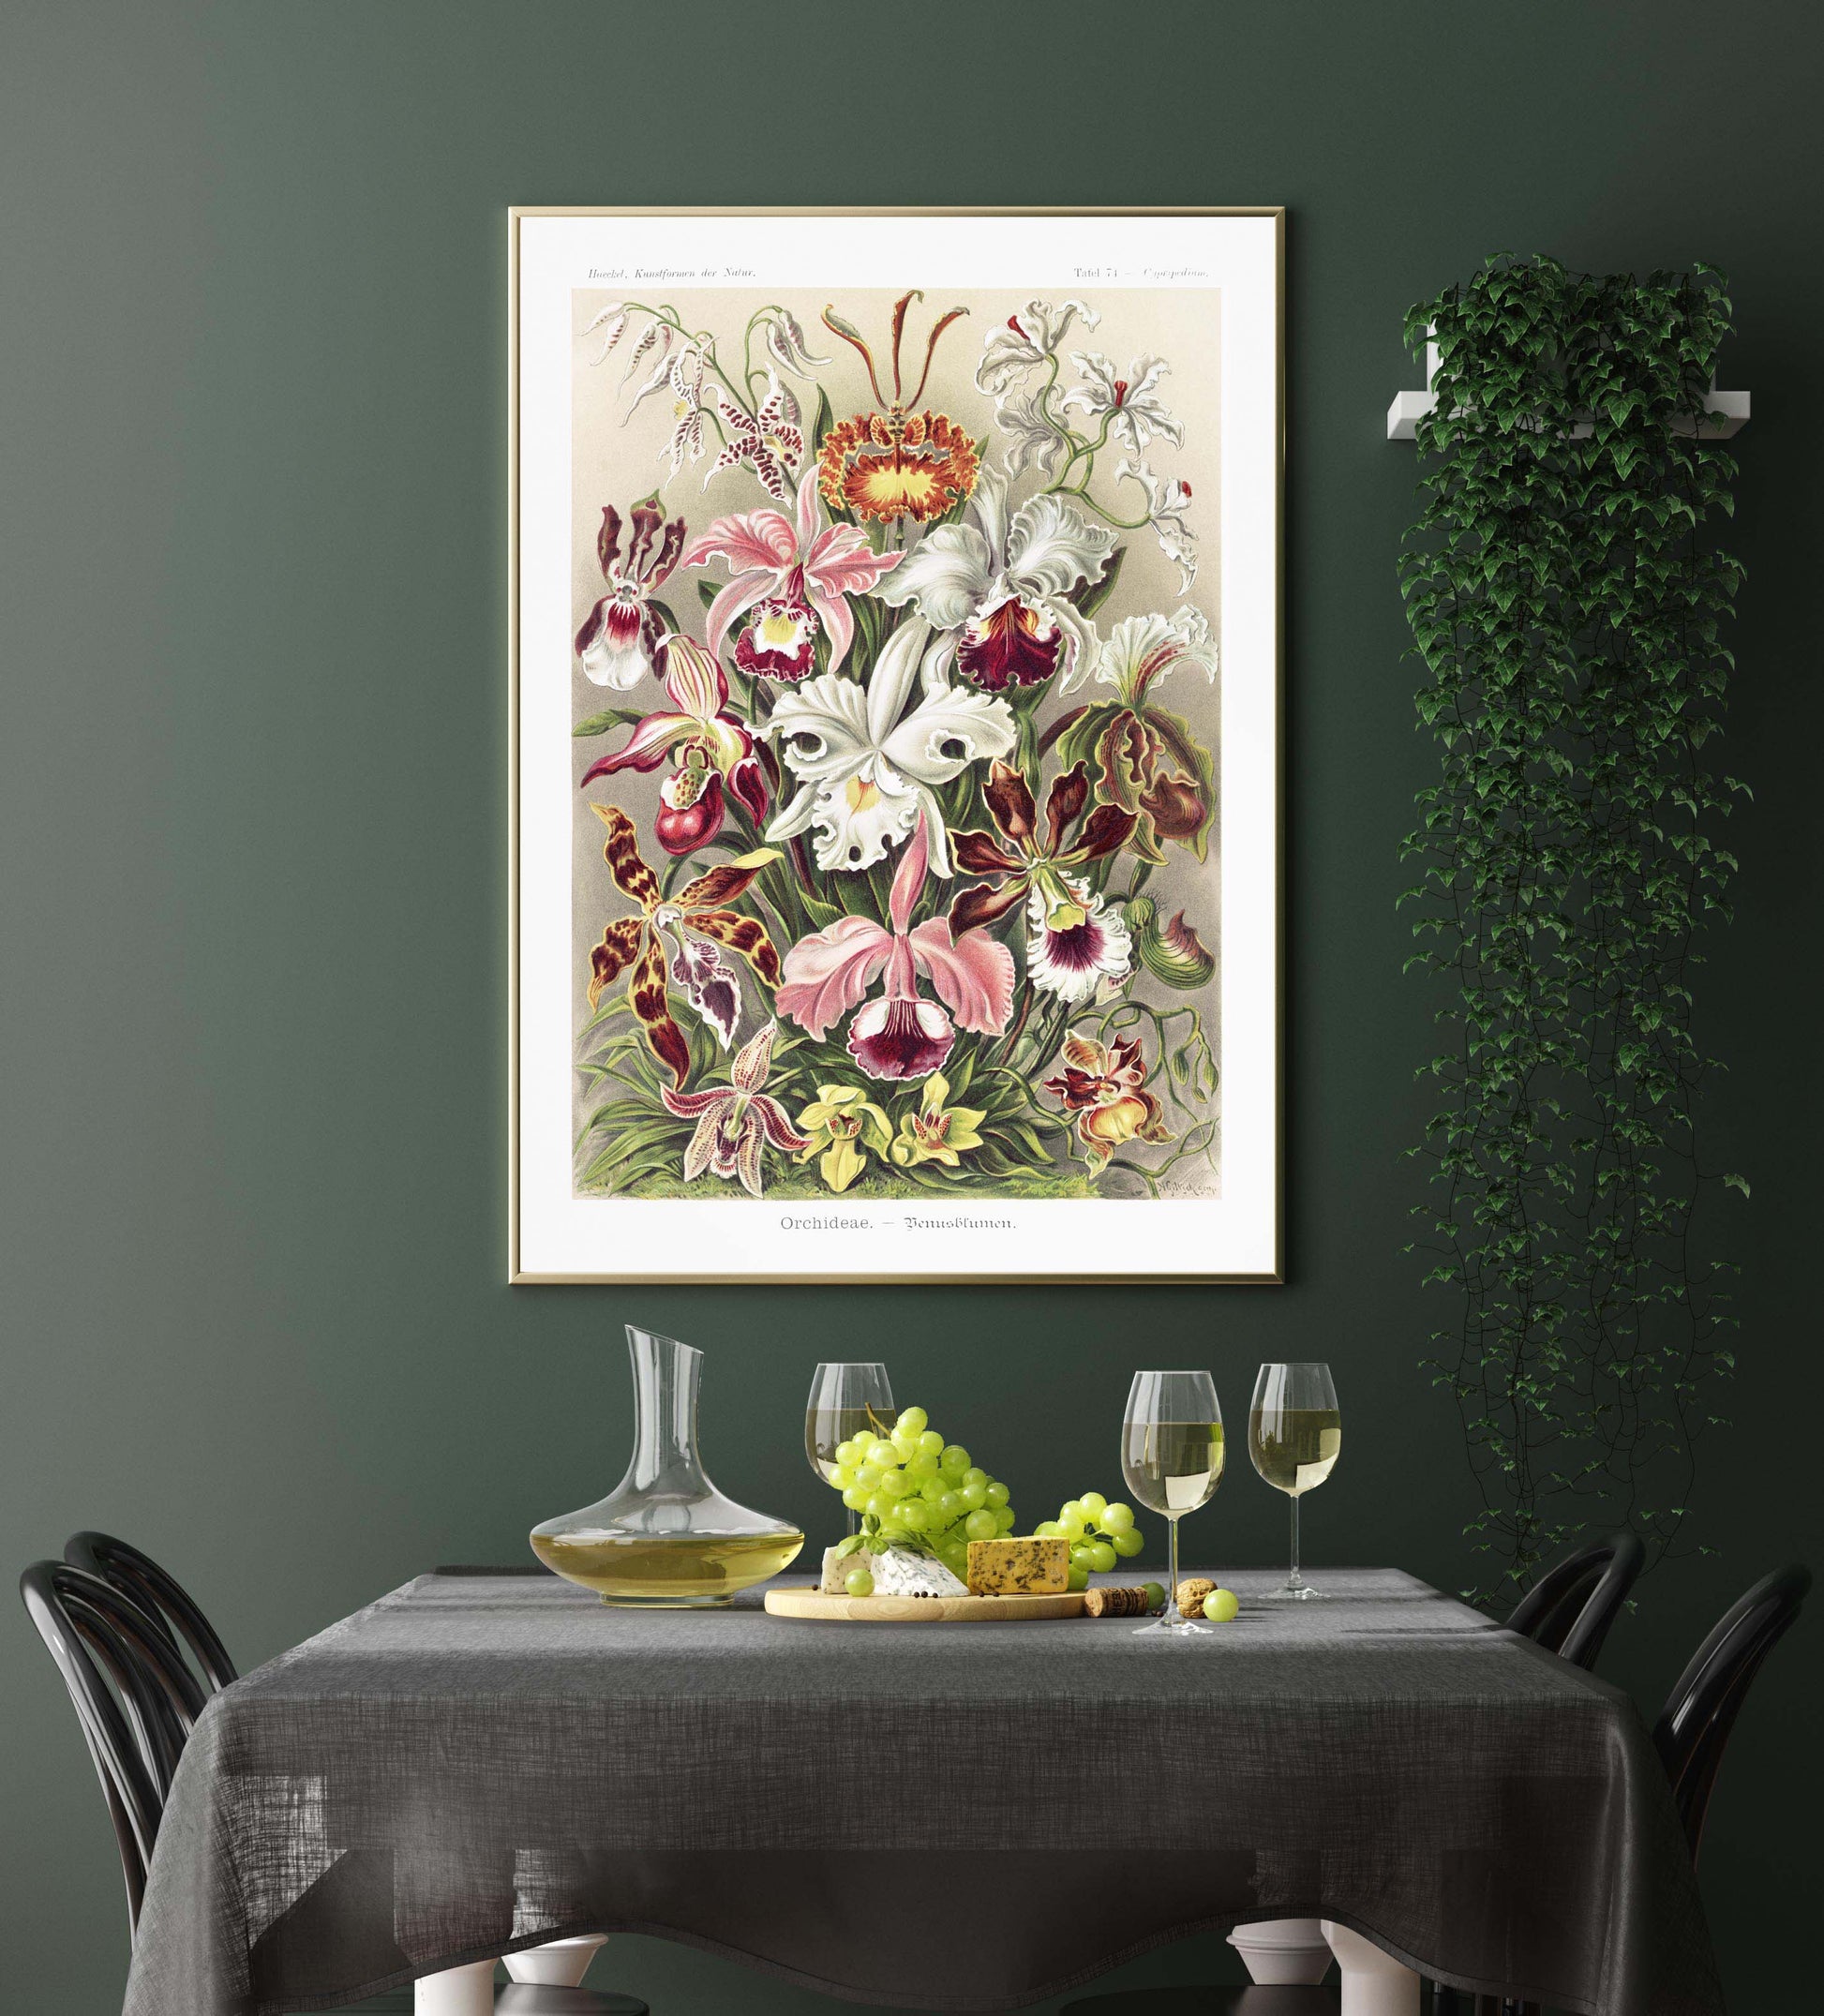 Ernst Haeckel Wall Art - Orchideae Lilly Flowers by Ernst Haeckel Poster with borders